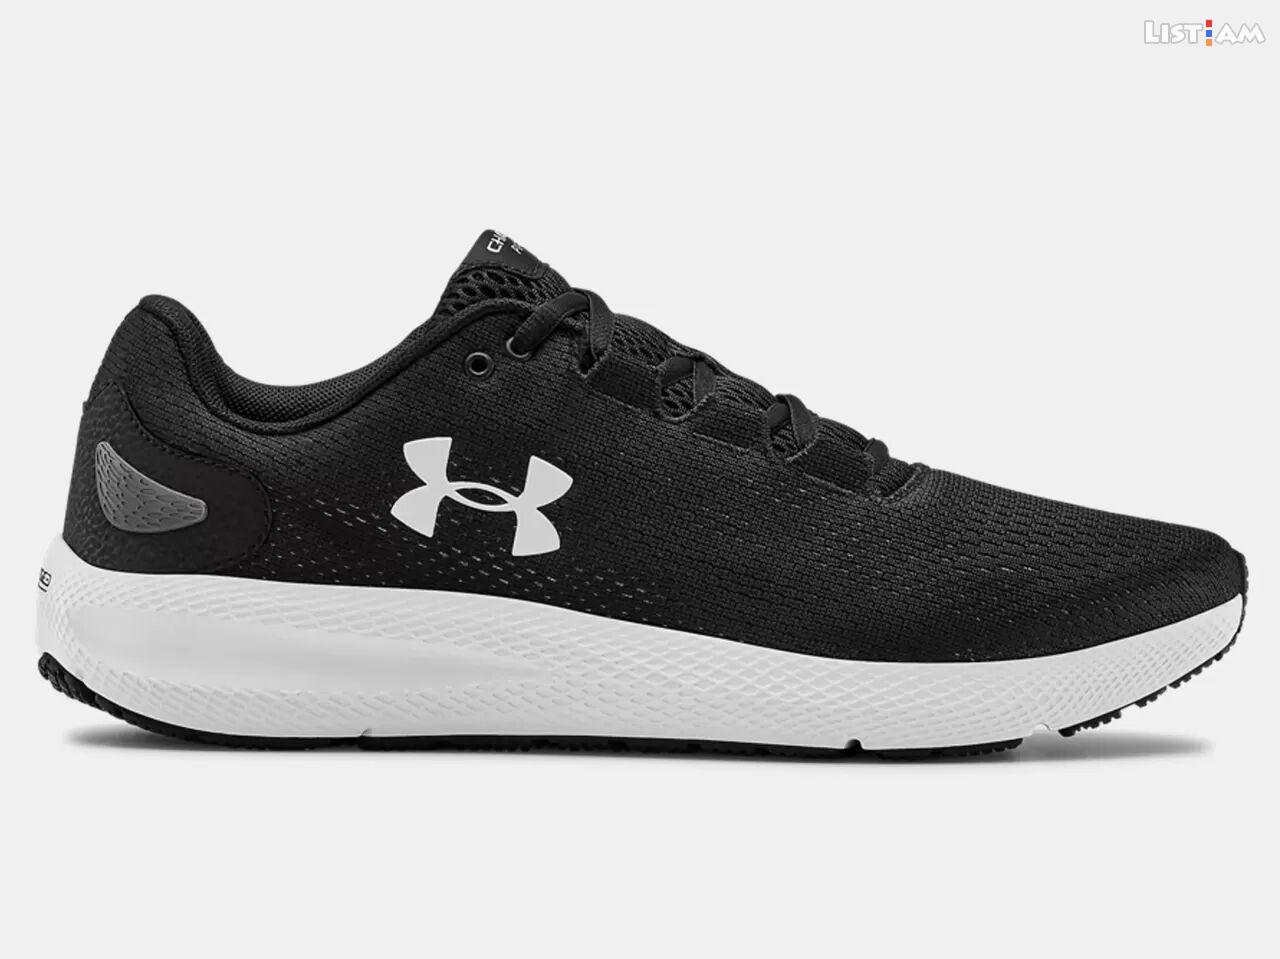 UNDER ARMOUR Deluxe